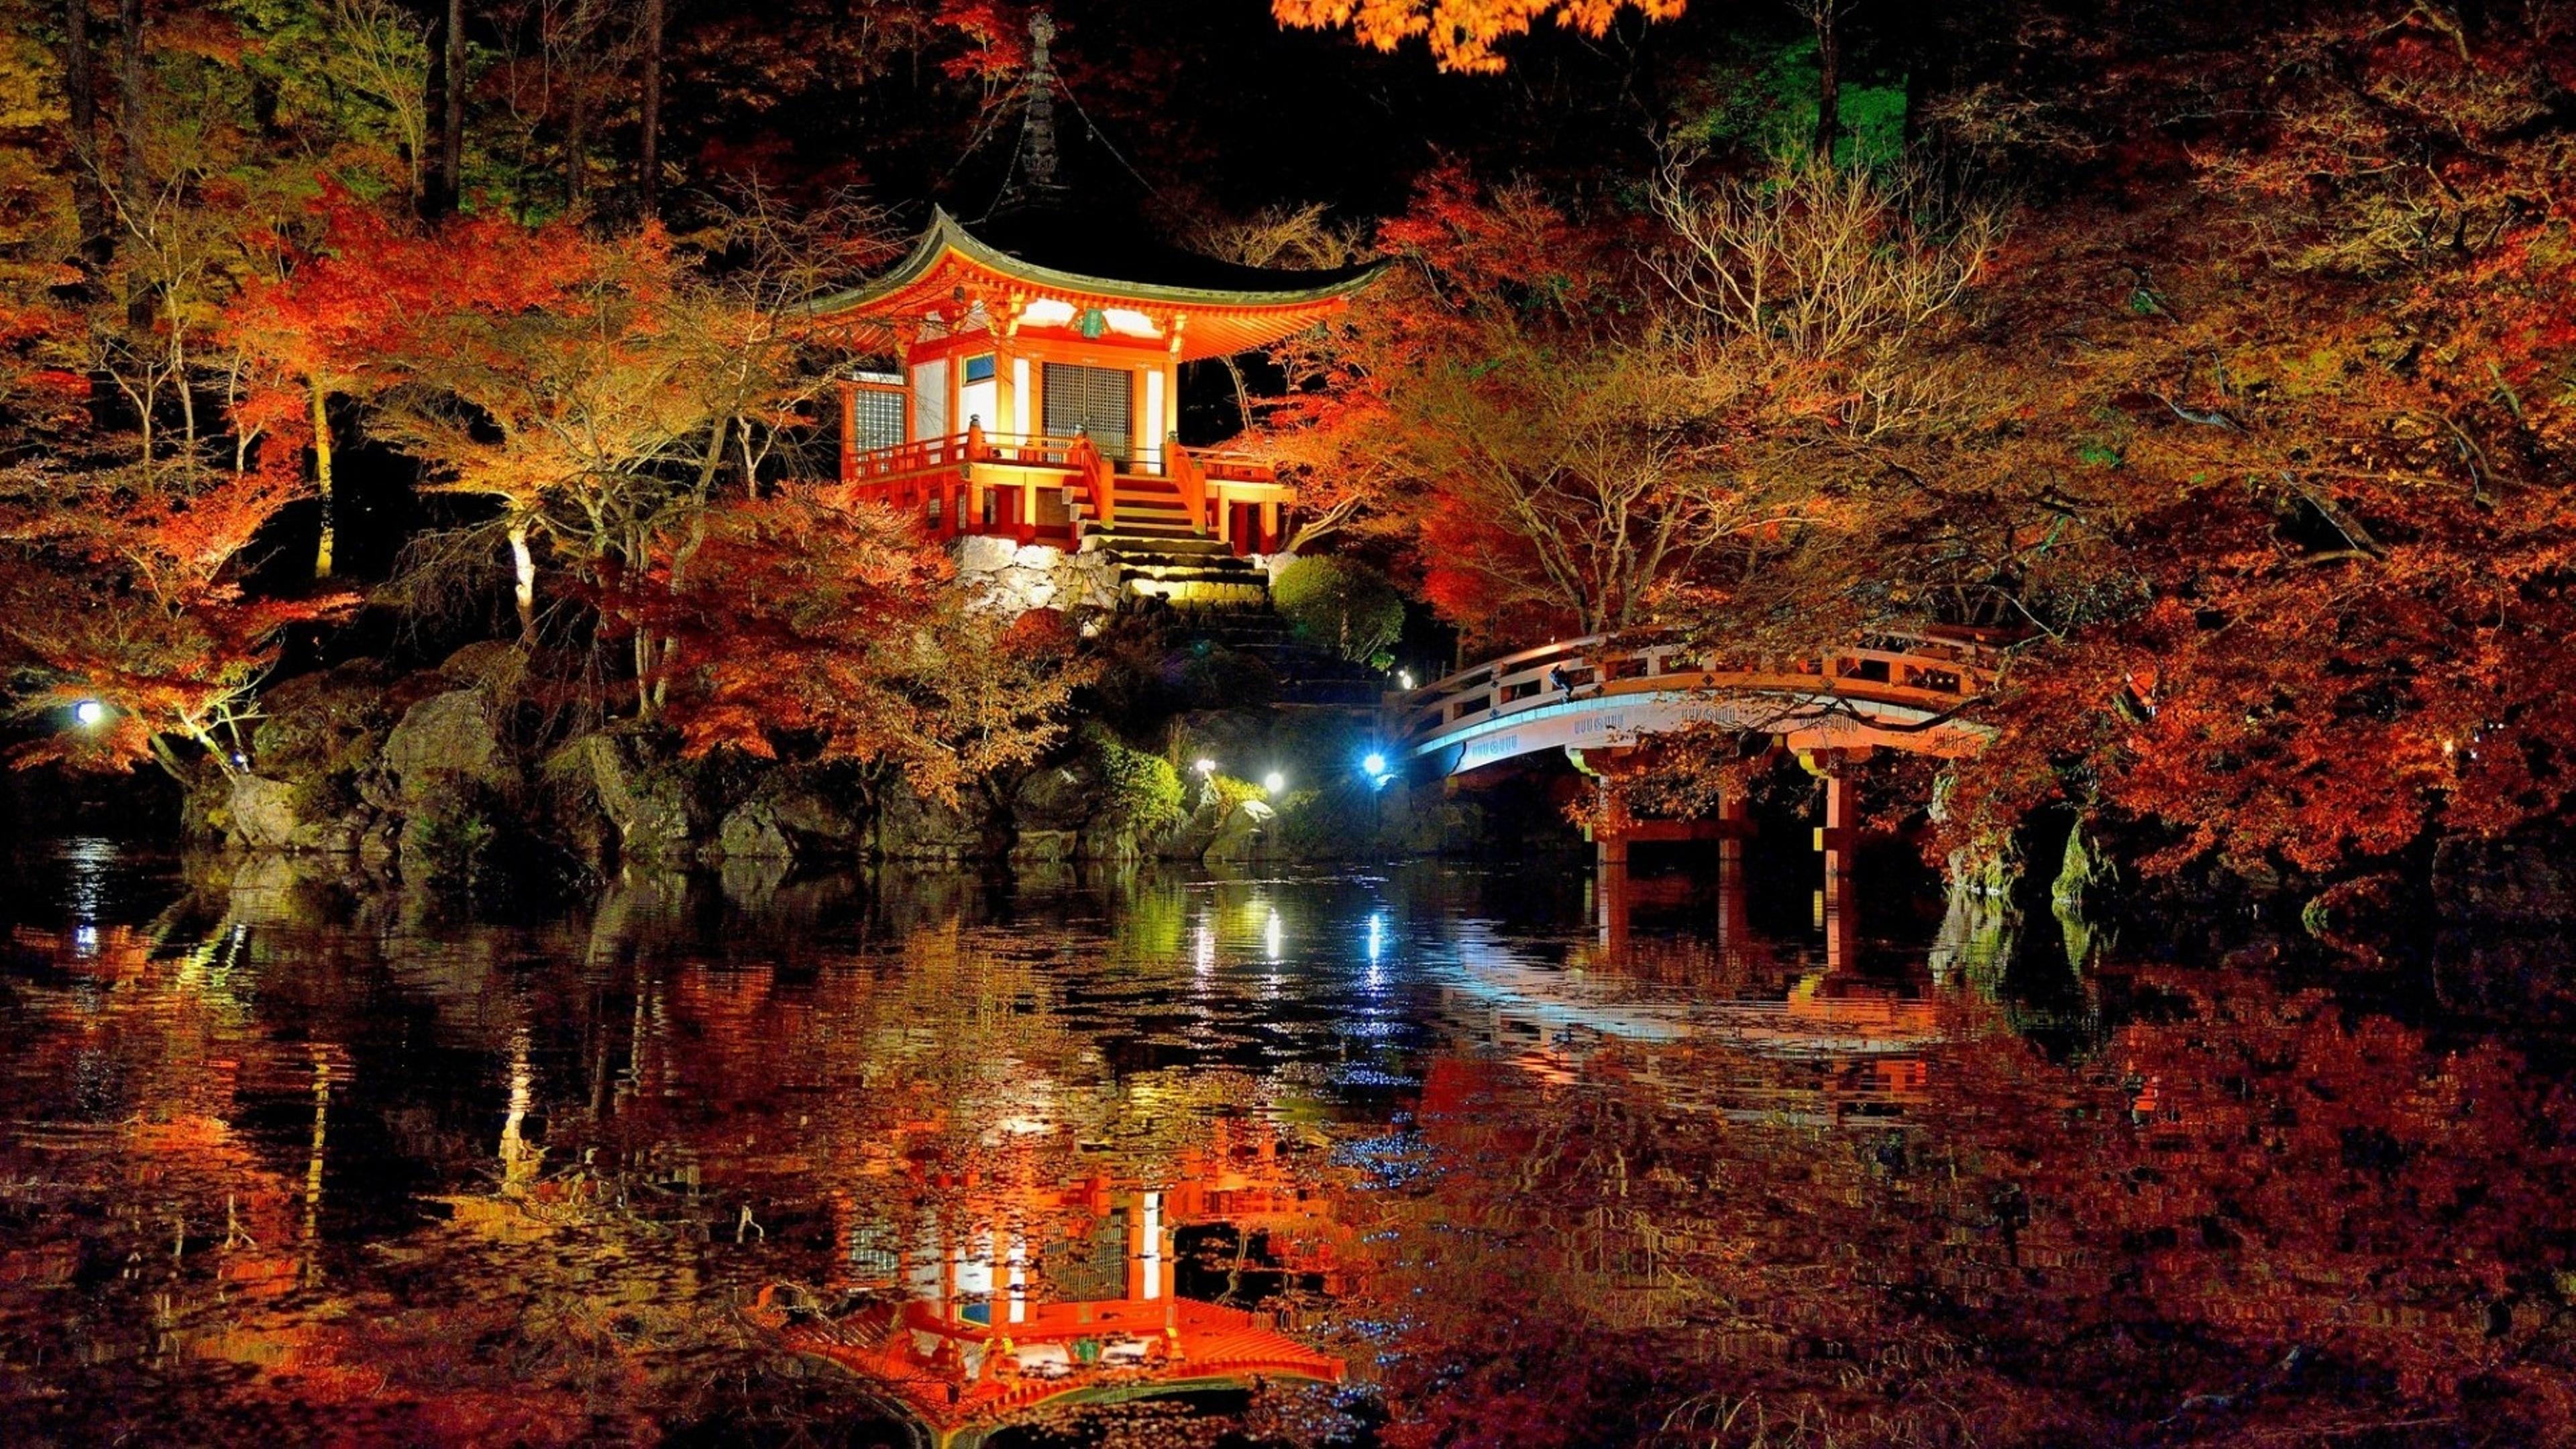 3840 x 2160 · jpeg - An amazing japanese garden - Colorful nature Wallpaper Download 3840x2160